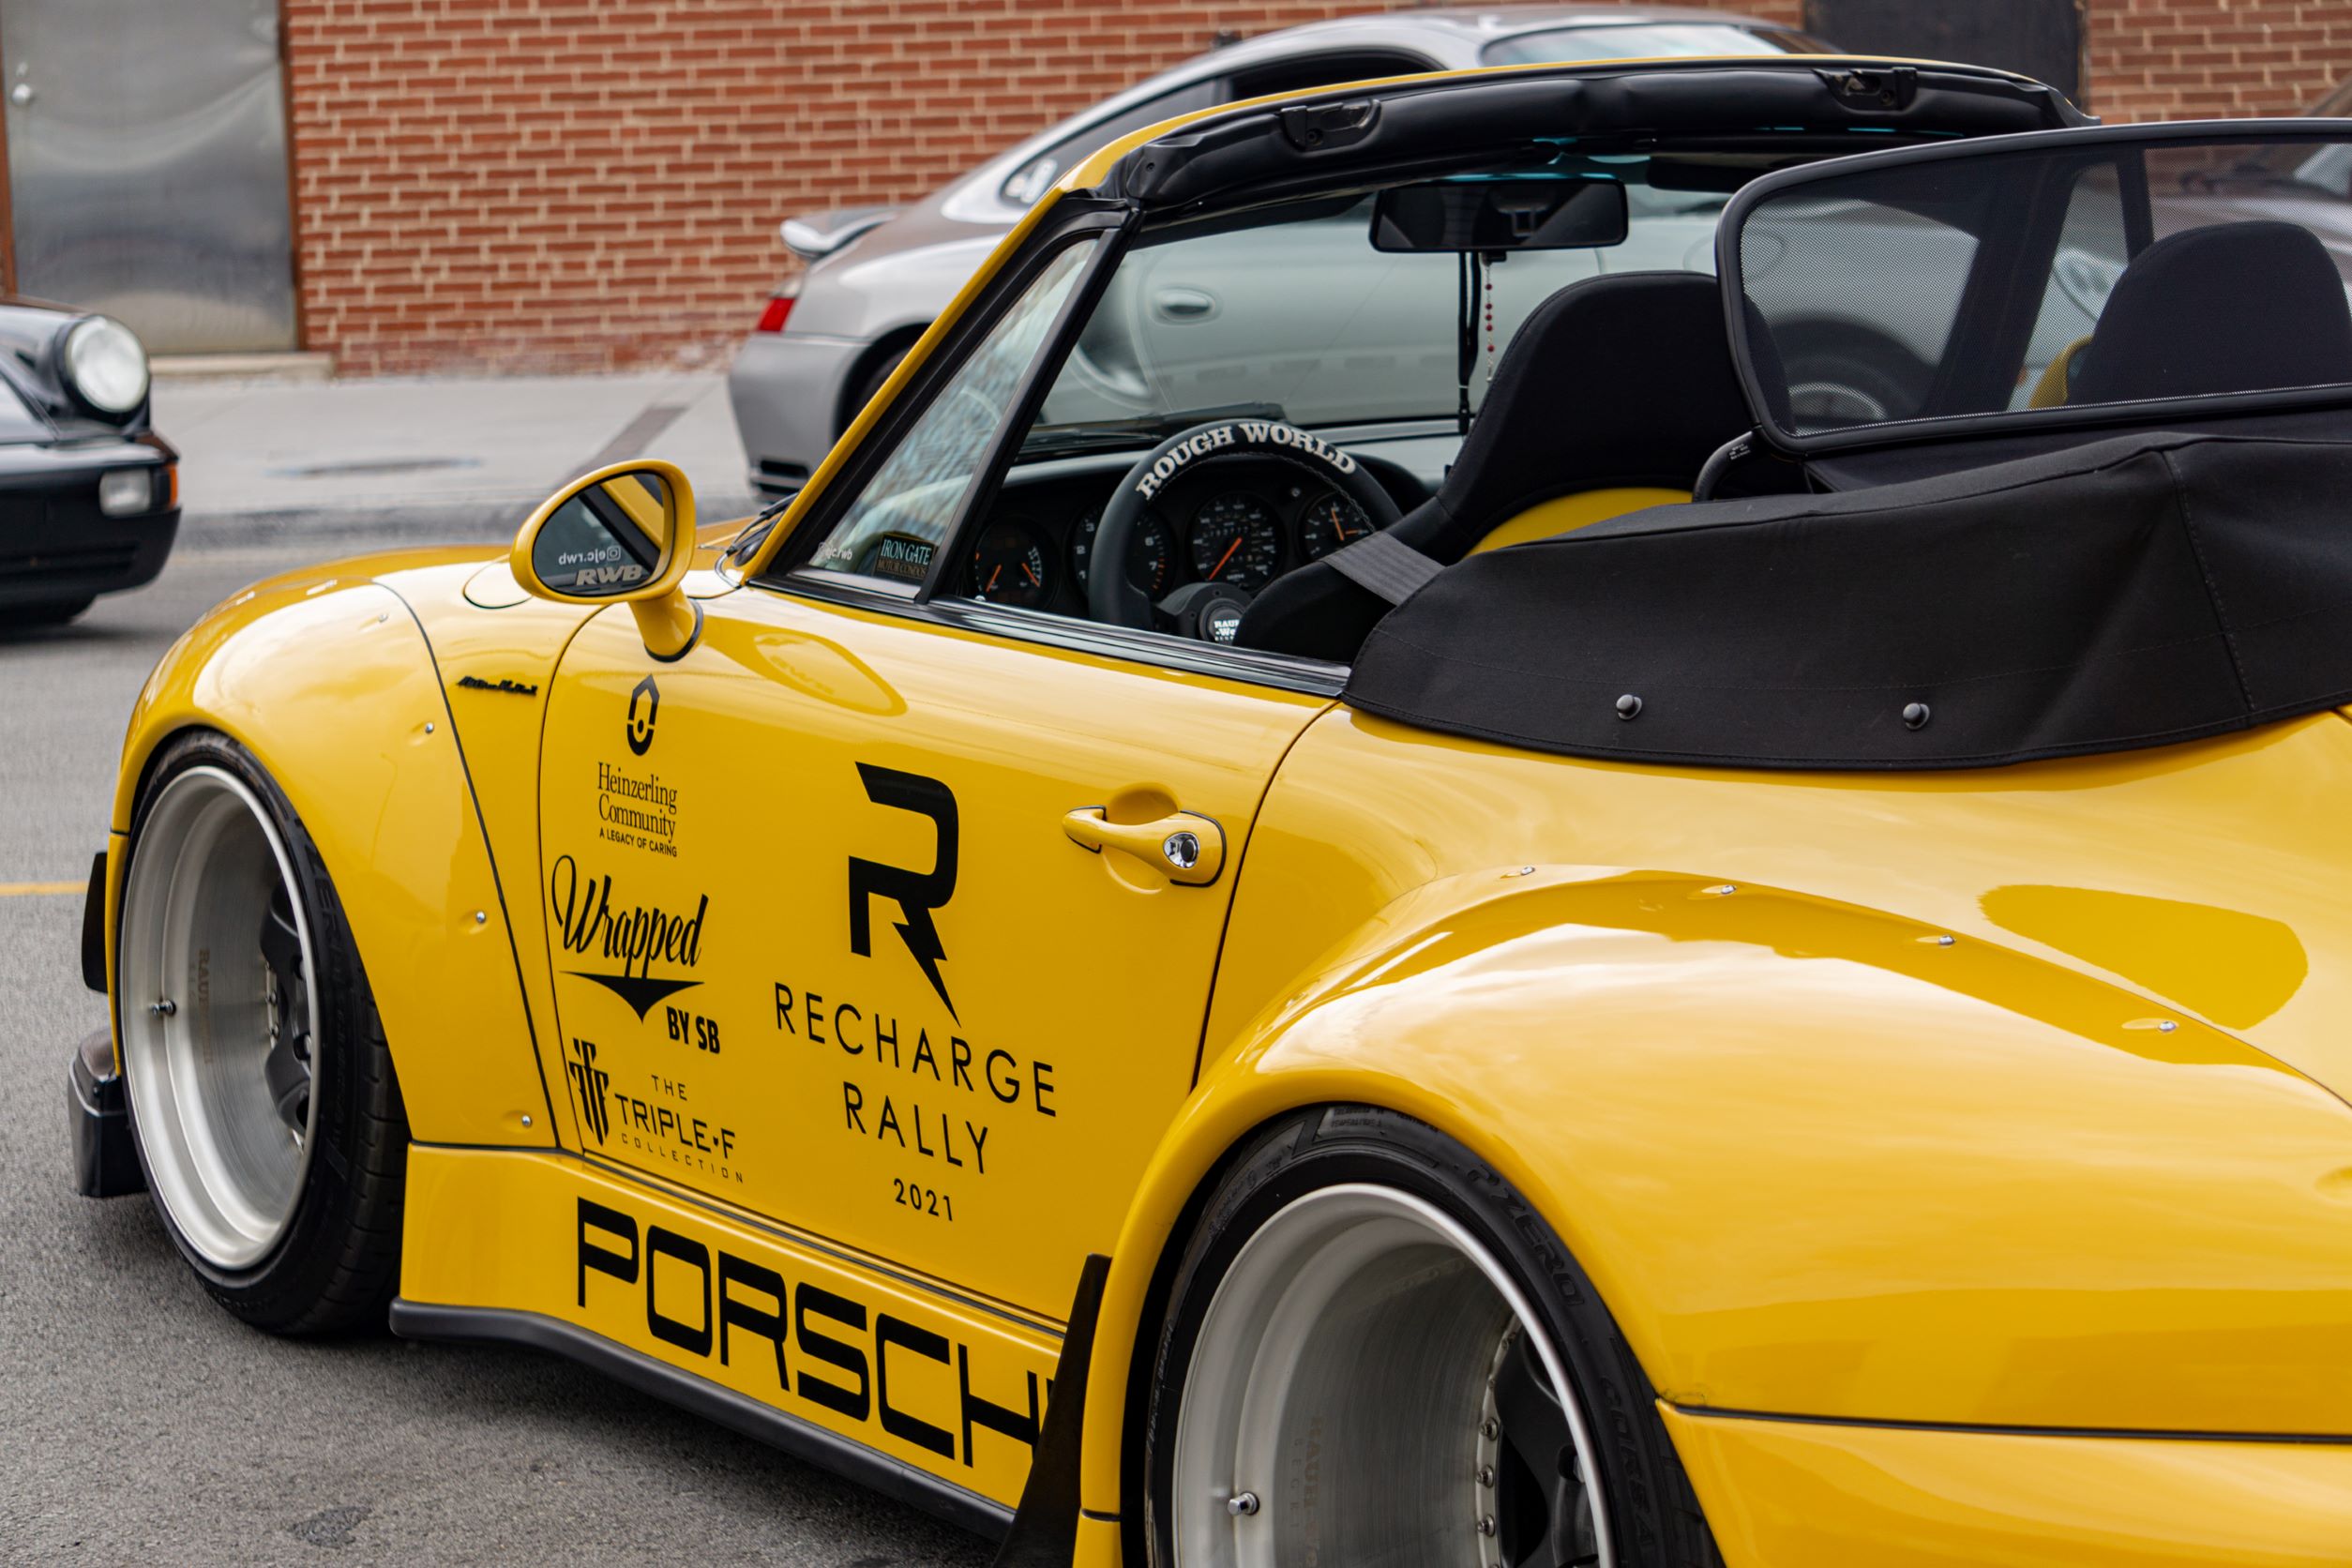 The rear 3/4 close-up view of the yellow-and-black RWB Porsche 993 911 Cabriolet 'Nohra'